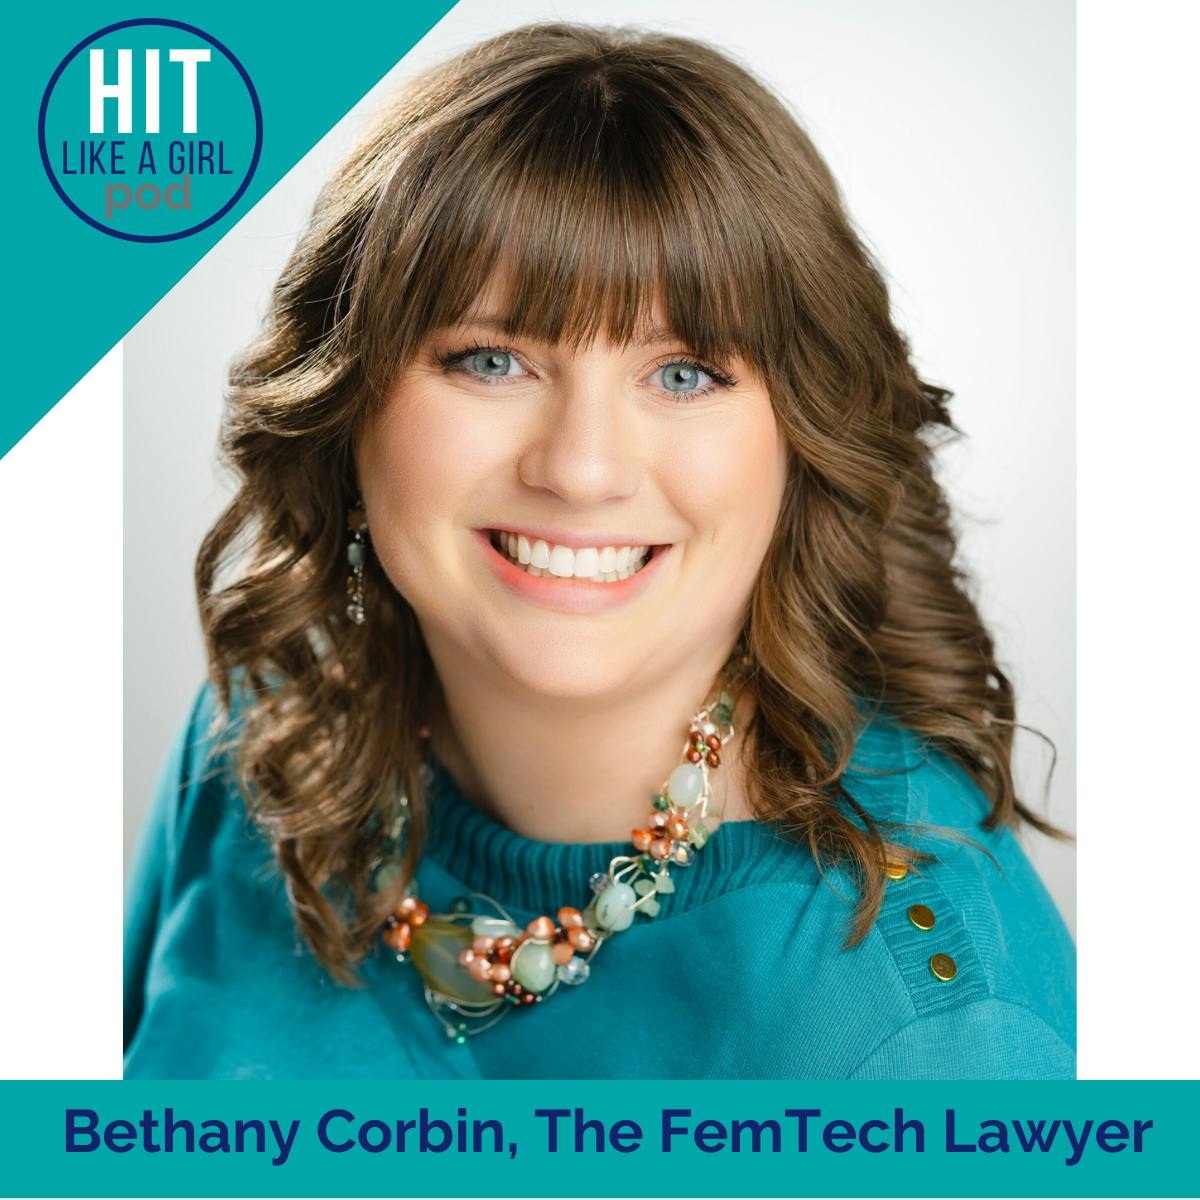 Bethany Corbin on the Fast-Changing Healthcare Law Landscape